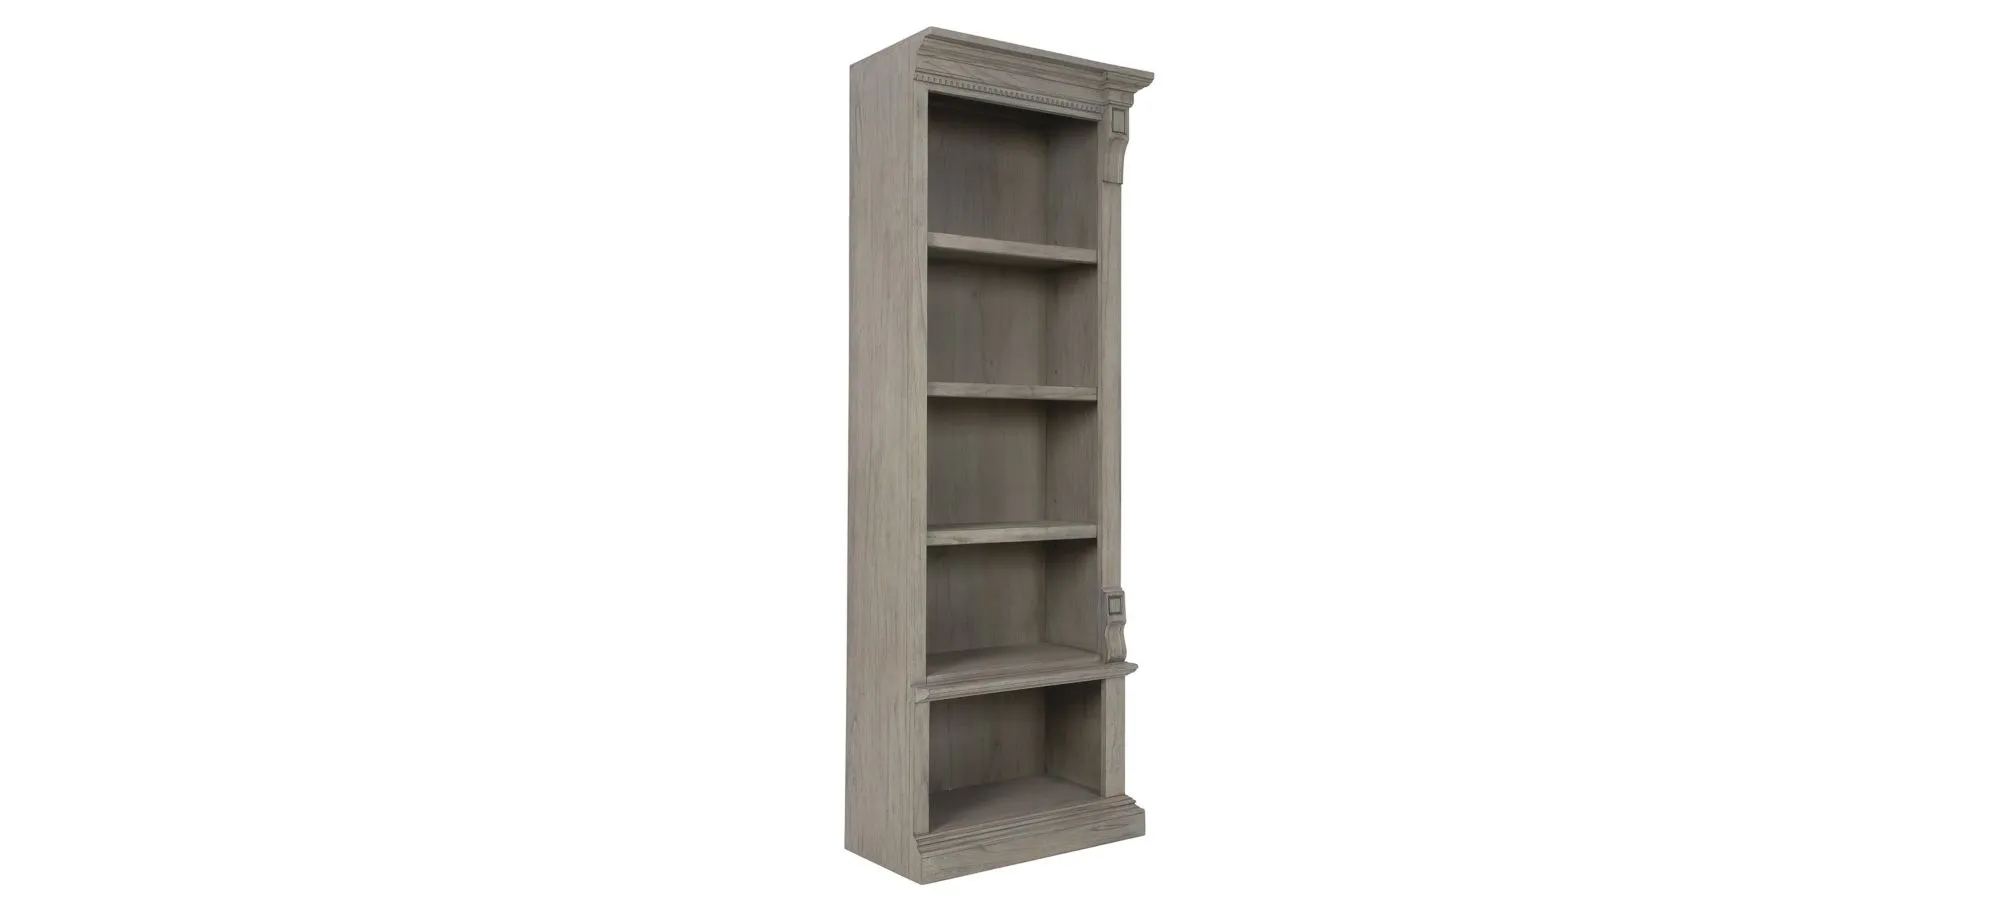 Wellington Executive Right Bookcase in WELLINGTON DRIFTWOOD by Hekman Furniture Company